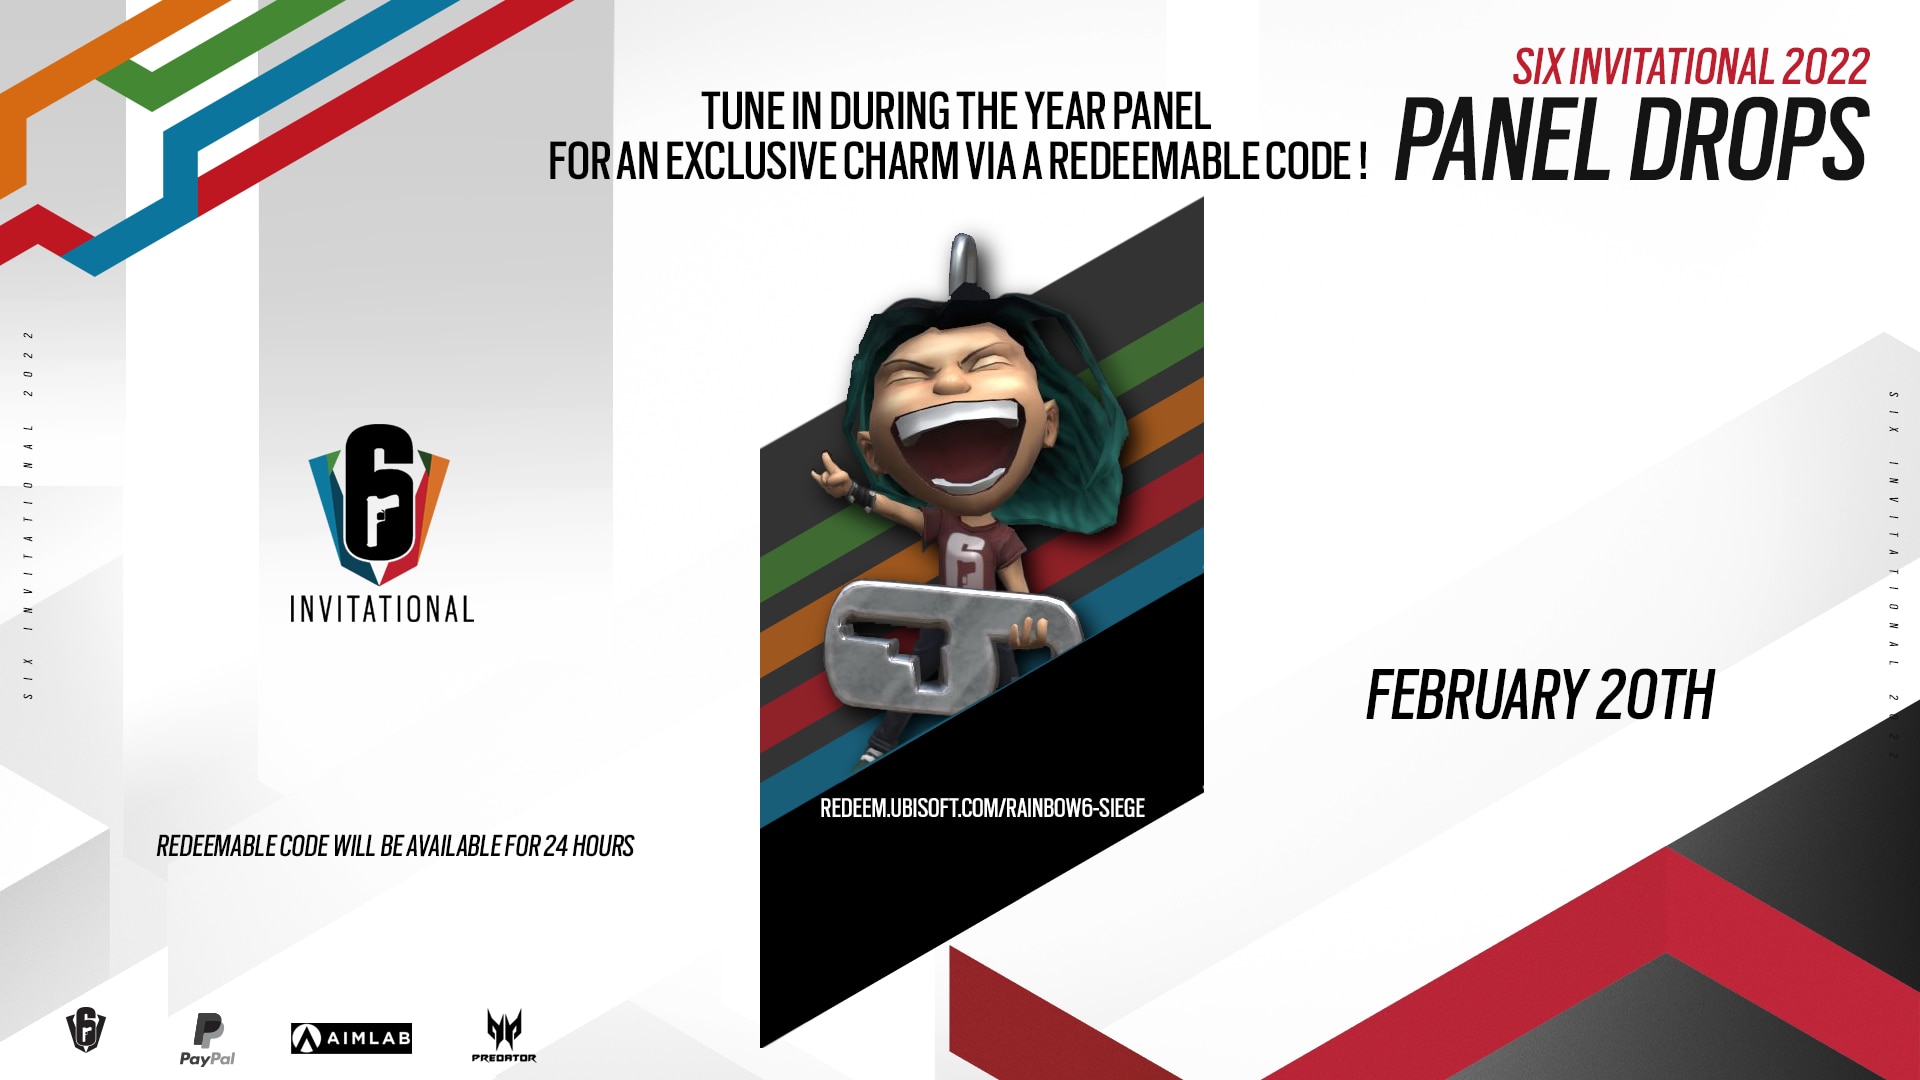 [R6SE] - Introducing the Twitch Drops Program for the Six Invitational 2022 - Panel Drop